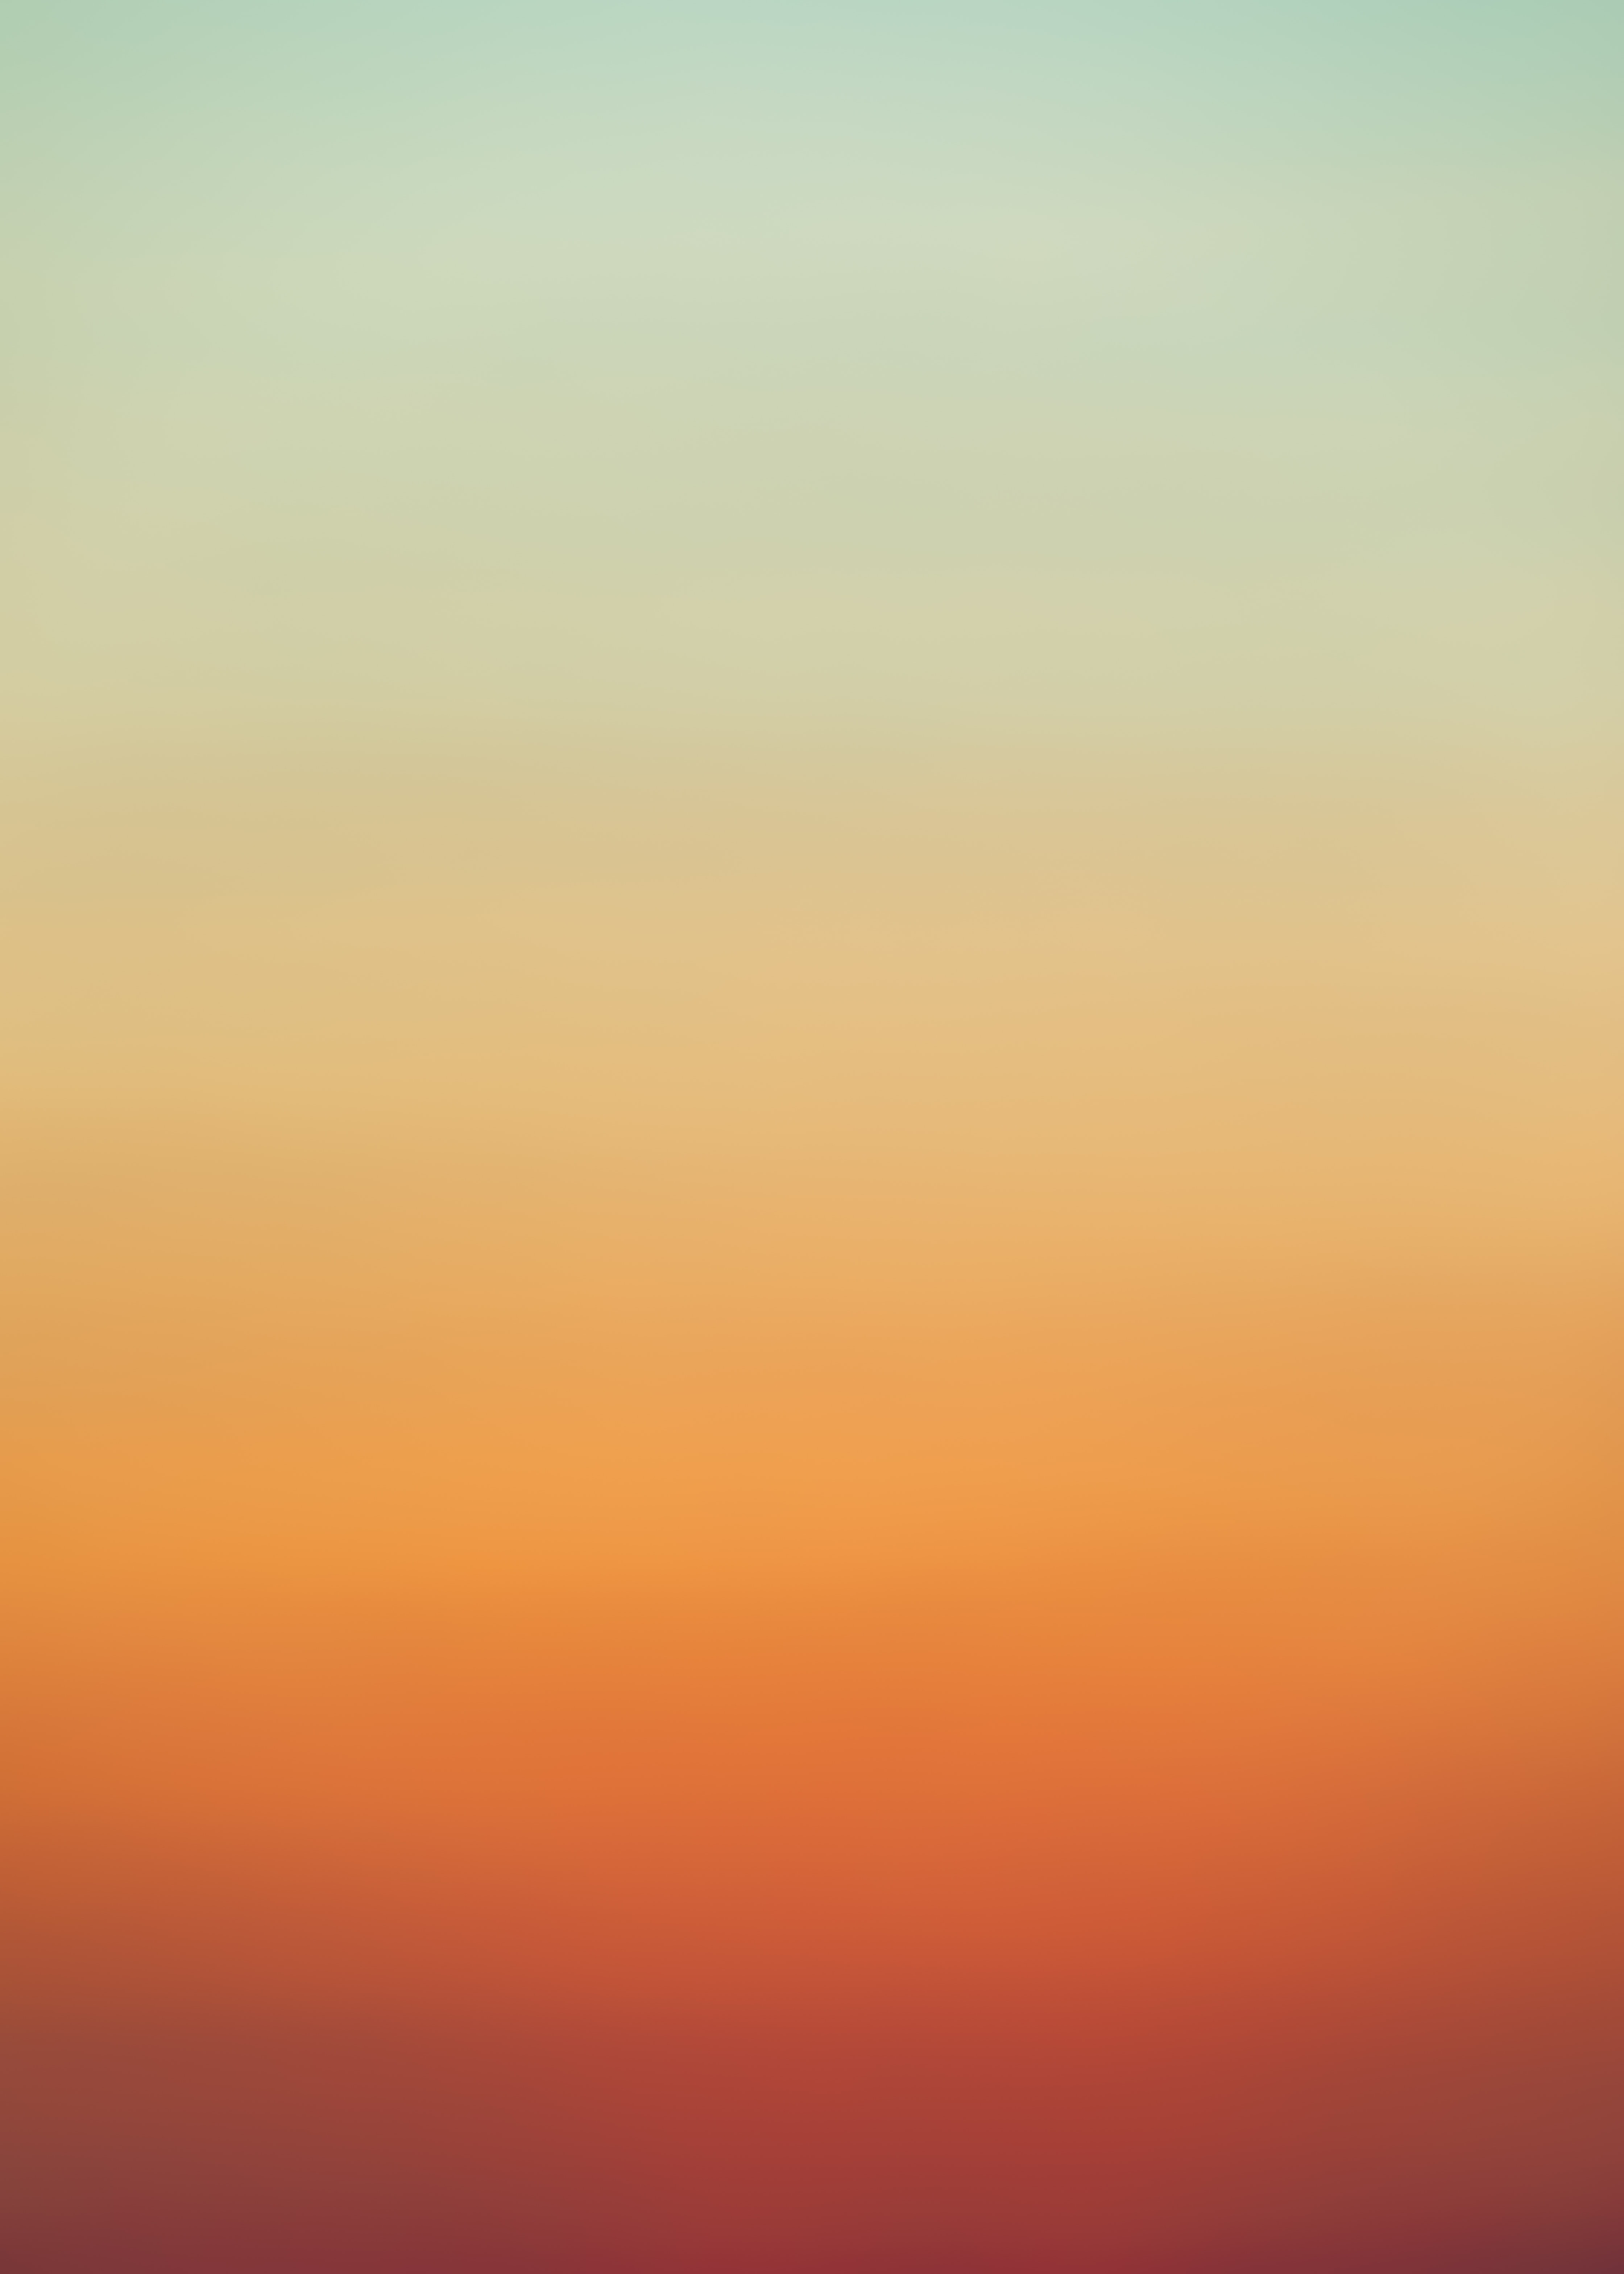 gradient, abstract, background, yellow, orange, color